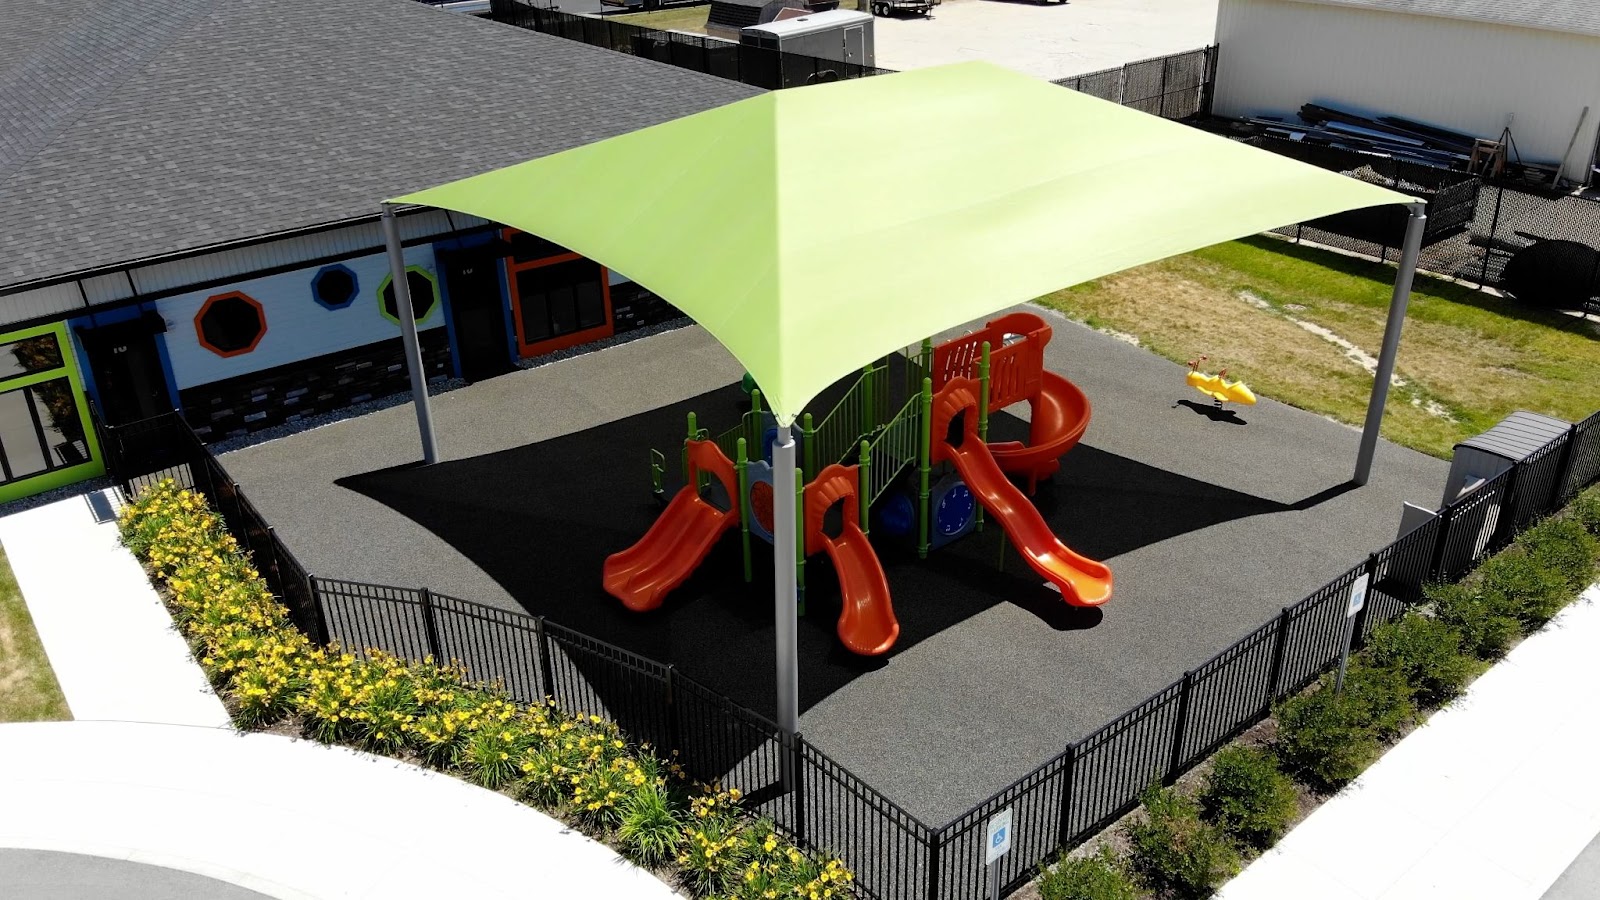 fabric shade structure over a playground